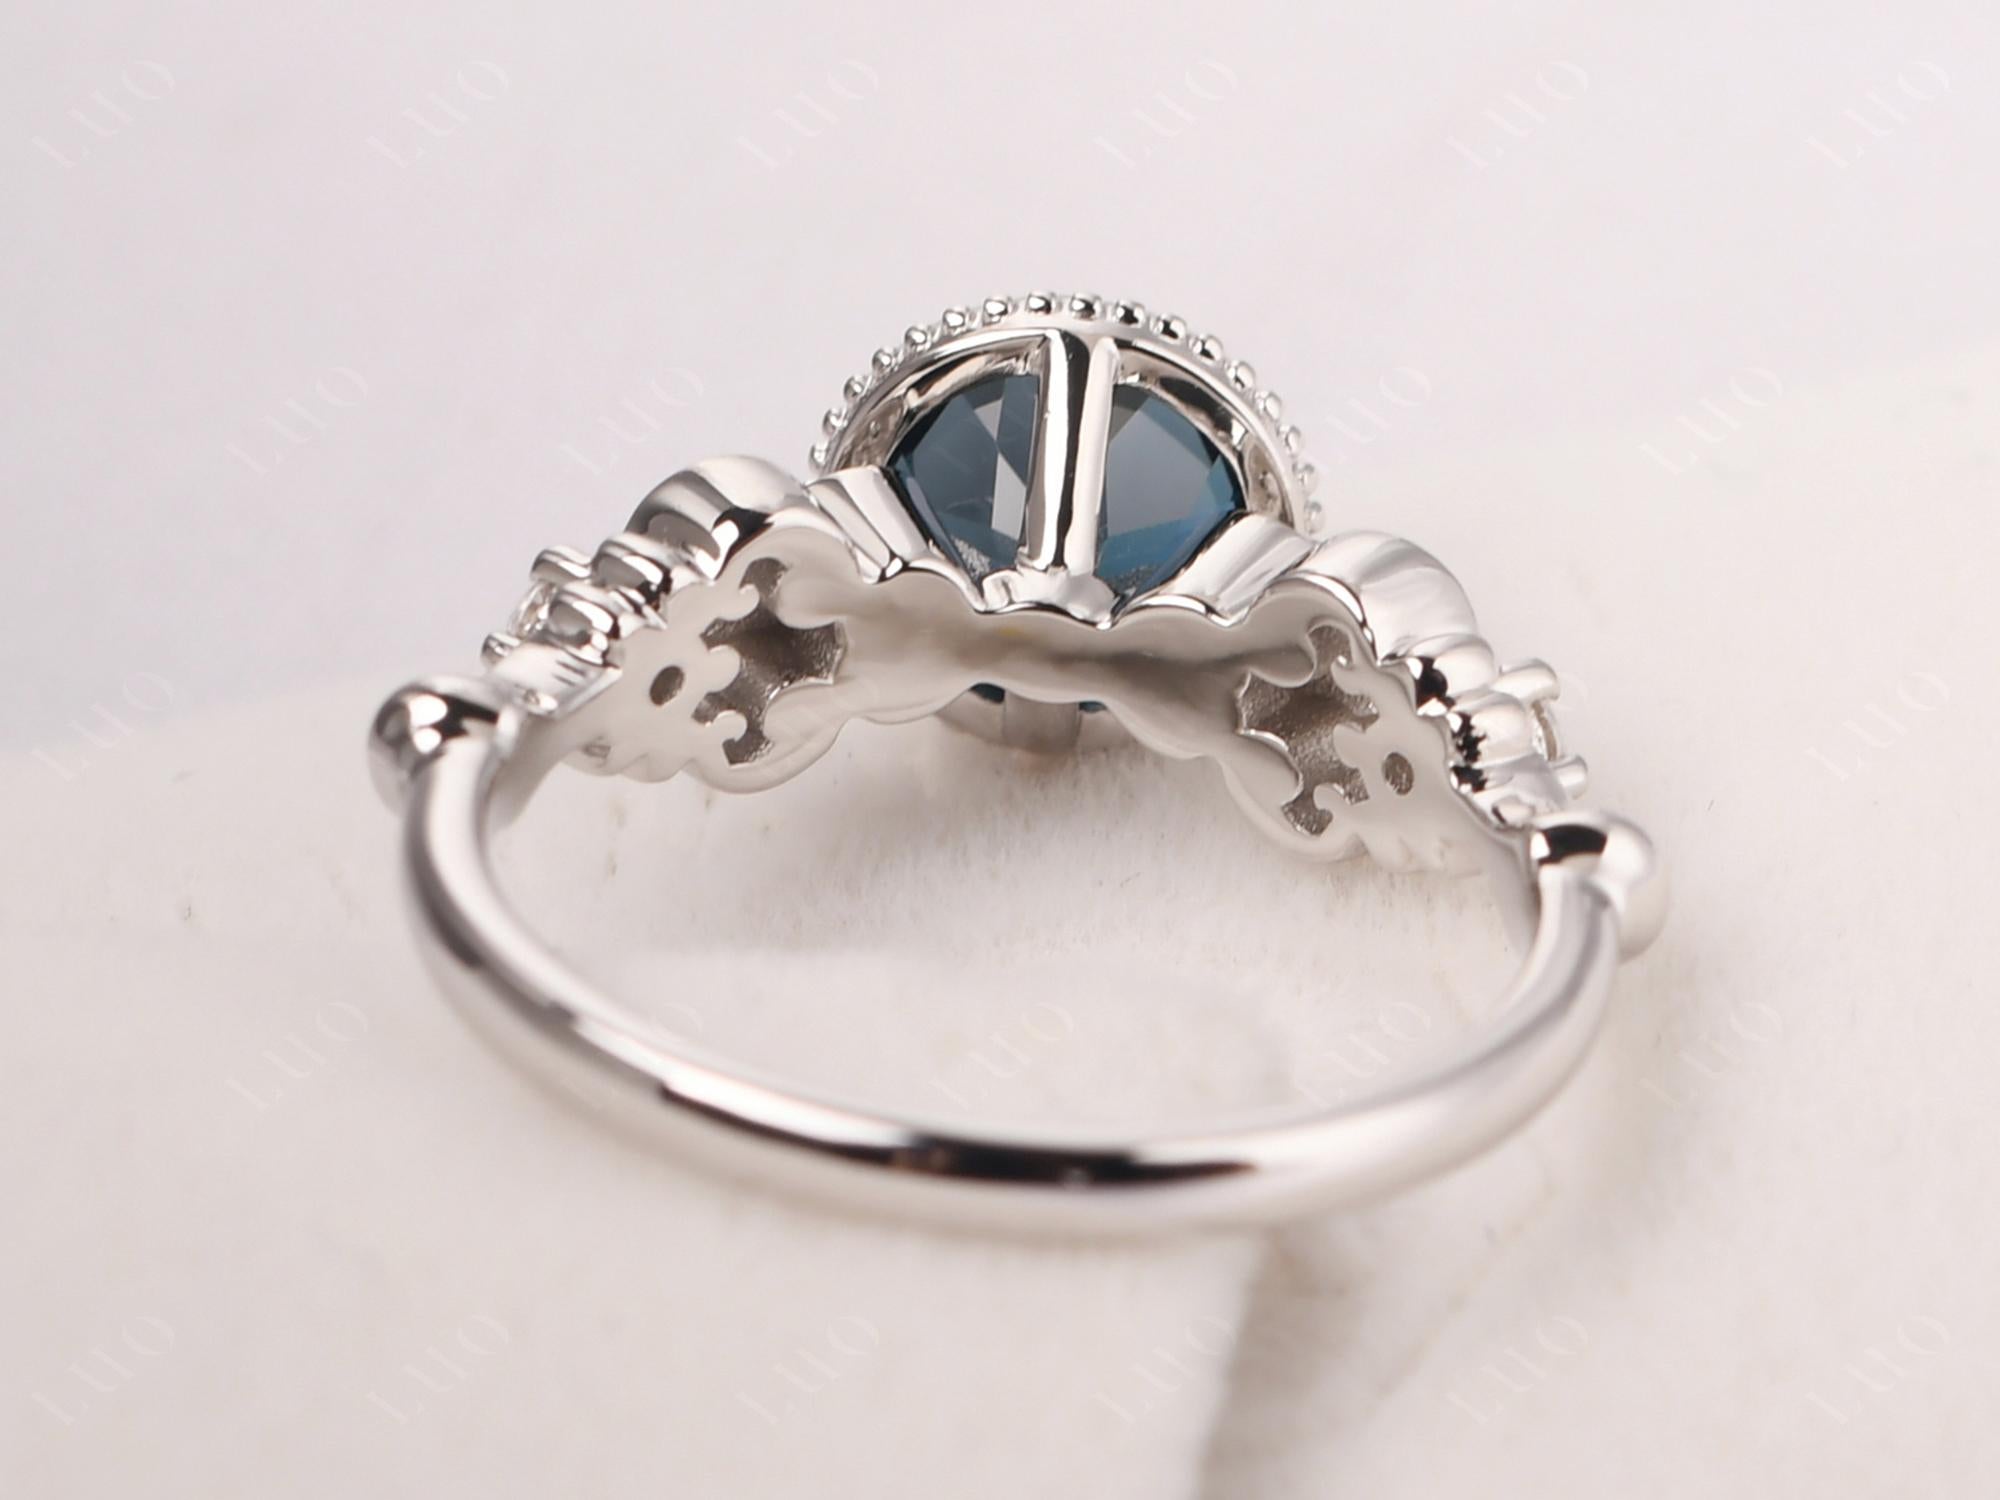 Art Deco Vintage Inspired London Blue Topaz Ring - LUO Jewelry